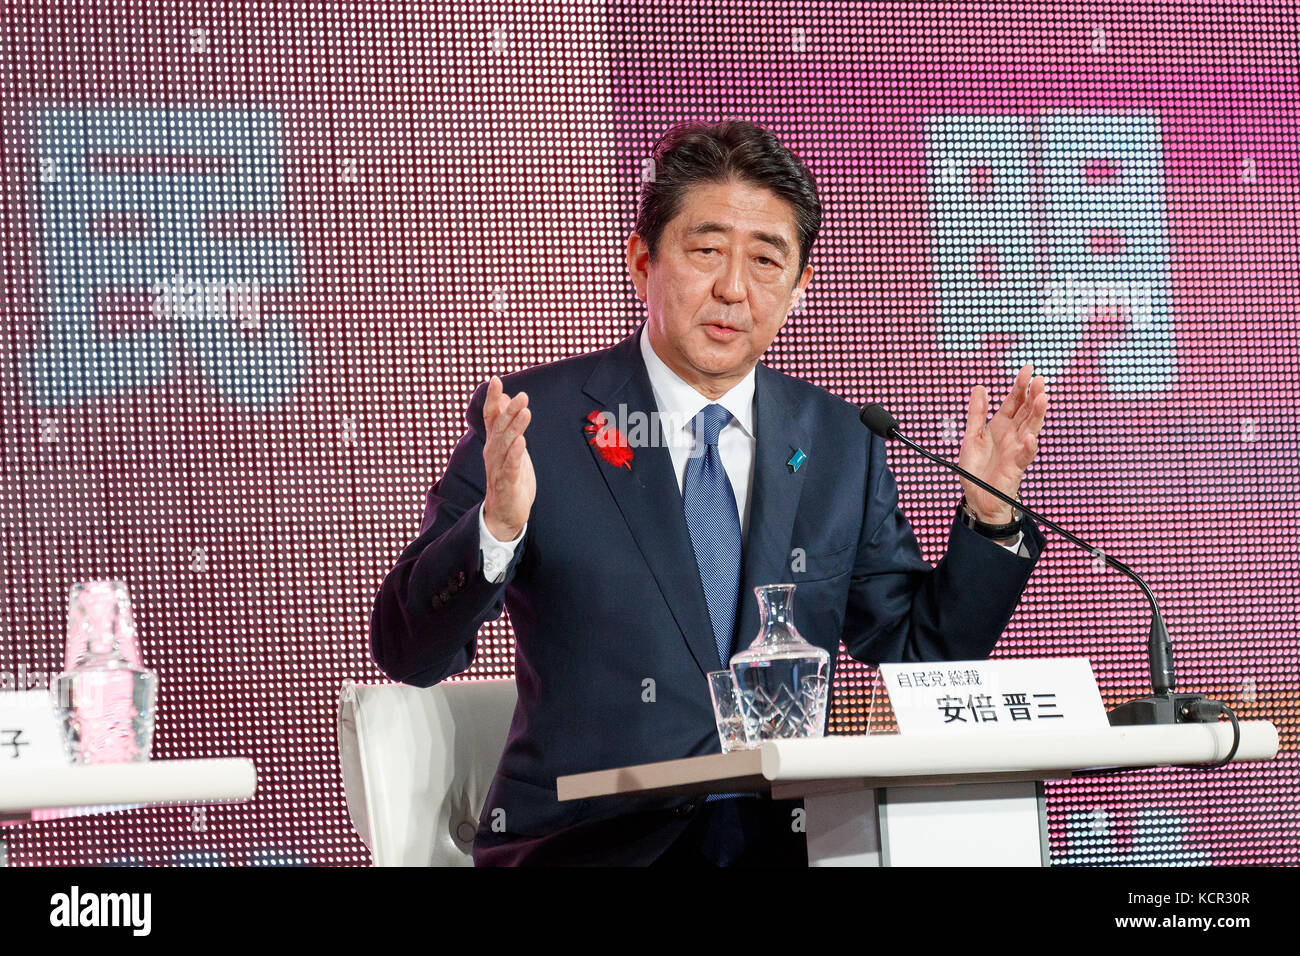 Tokyo, Japan. 7th Oct, 2017. Japan's Prime Minister and head of the Liberal Democratic Party of Japan (LDP) Shinzo Abe speaks during a public debate streamed online on October 7, 2017, Tokyo, Japan.  The public debate was organized and streamed online by the Japanese social video website Niconico in collaboration with Yahoo News site in Japan. Credit: Aflo Co. Ltd./Alamy Live News Stock Photo